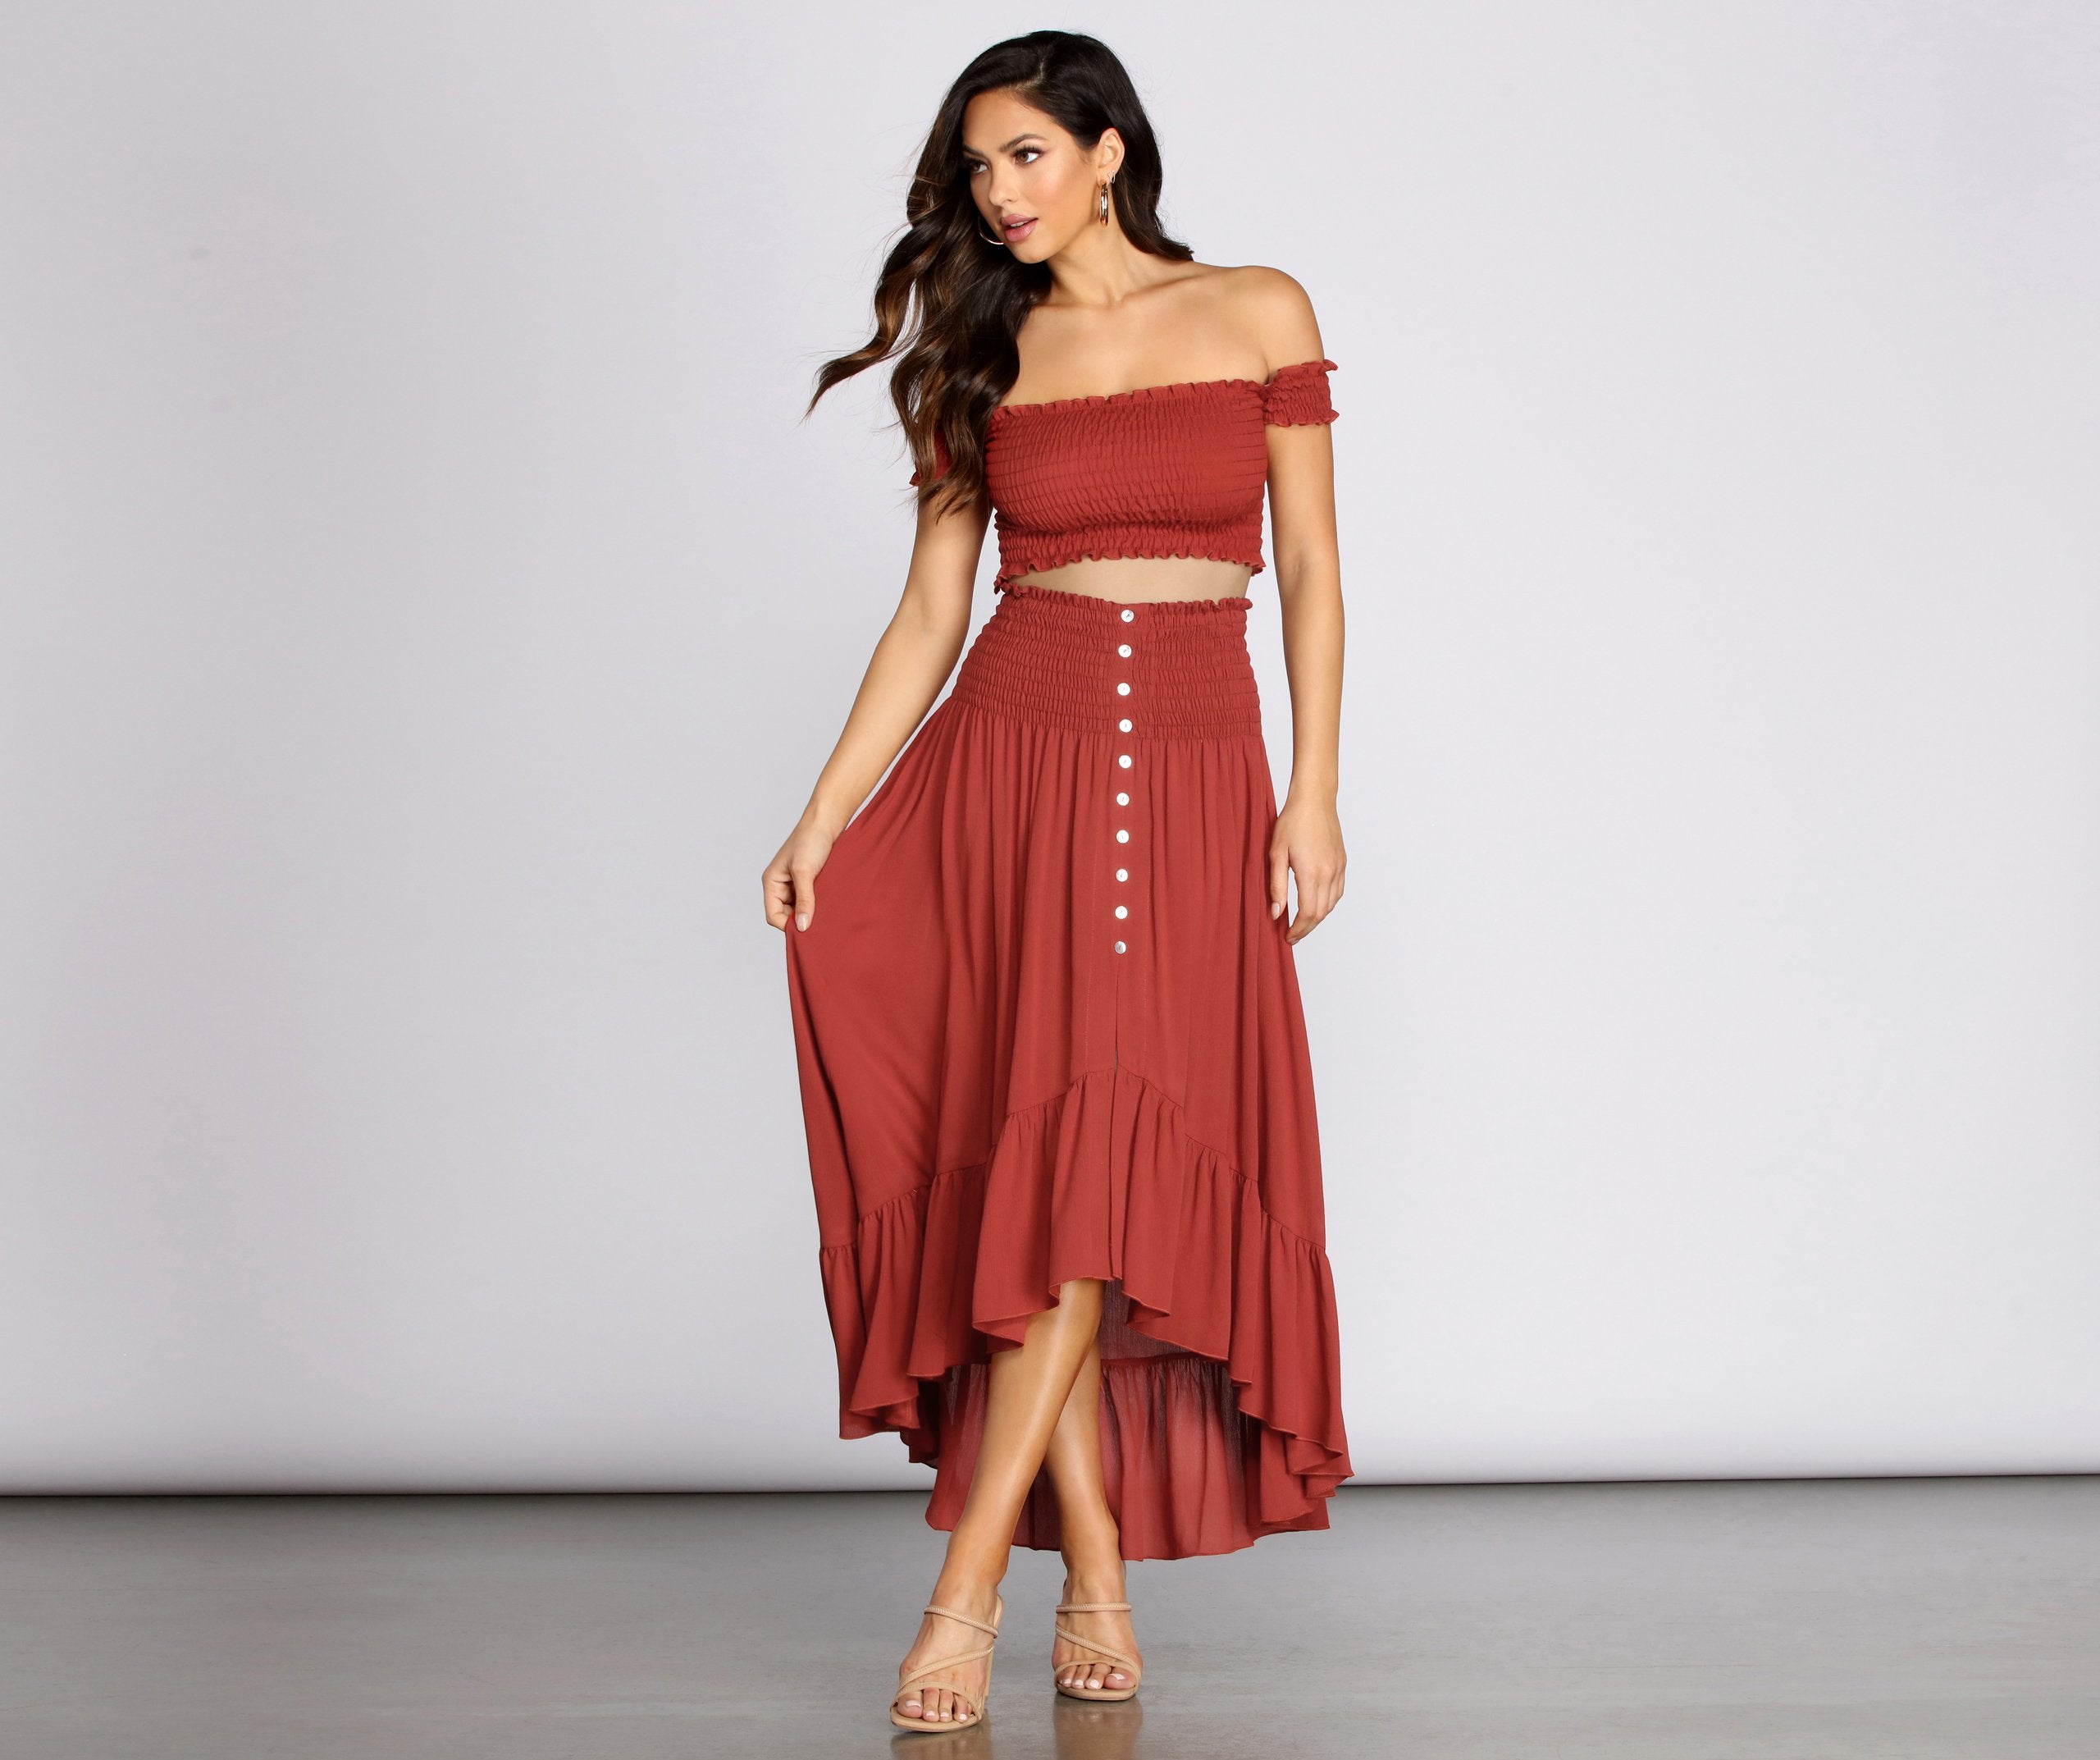 Dreamy Boho Off The Shoulder Gauze Top - Lady Occasions